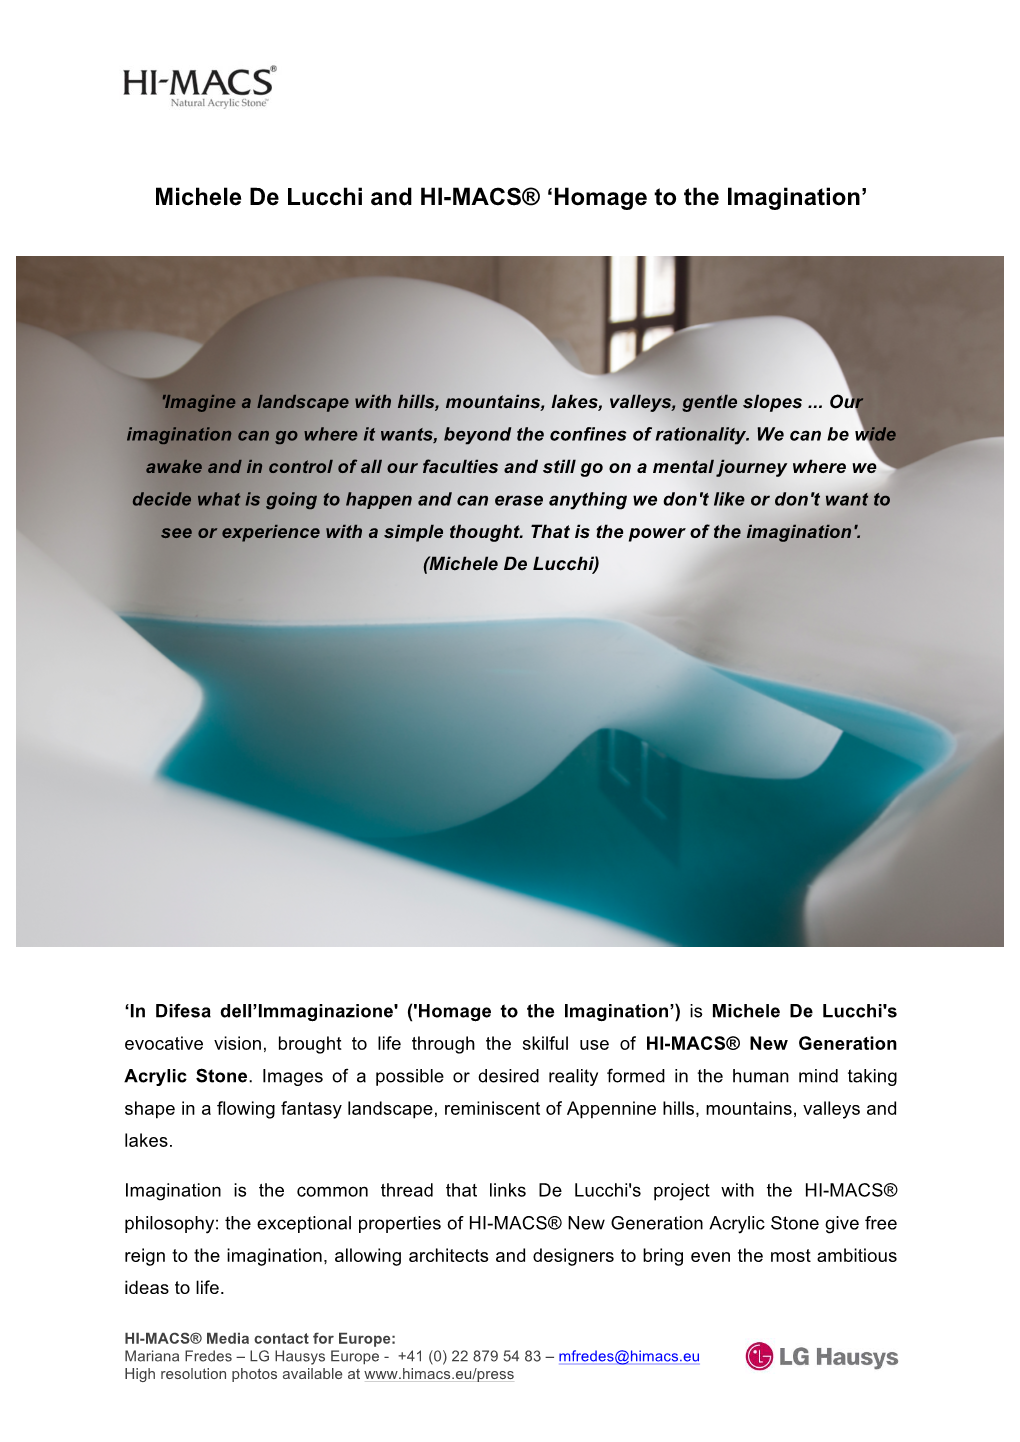 Michele De Lucchi and HI-MACS® 'Homage to the Imagination'